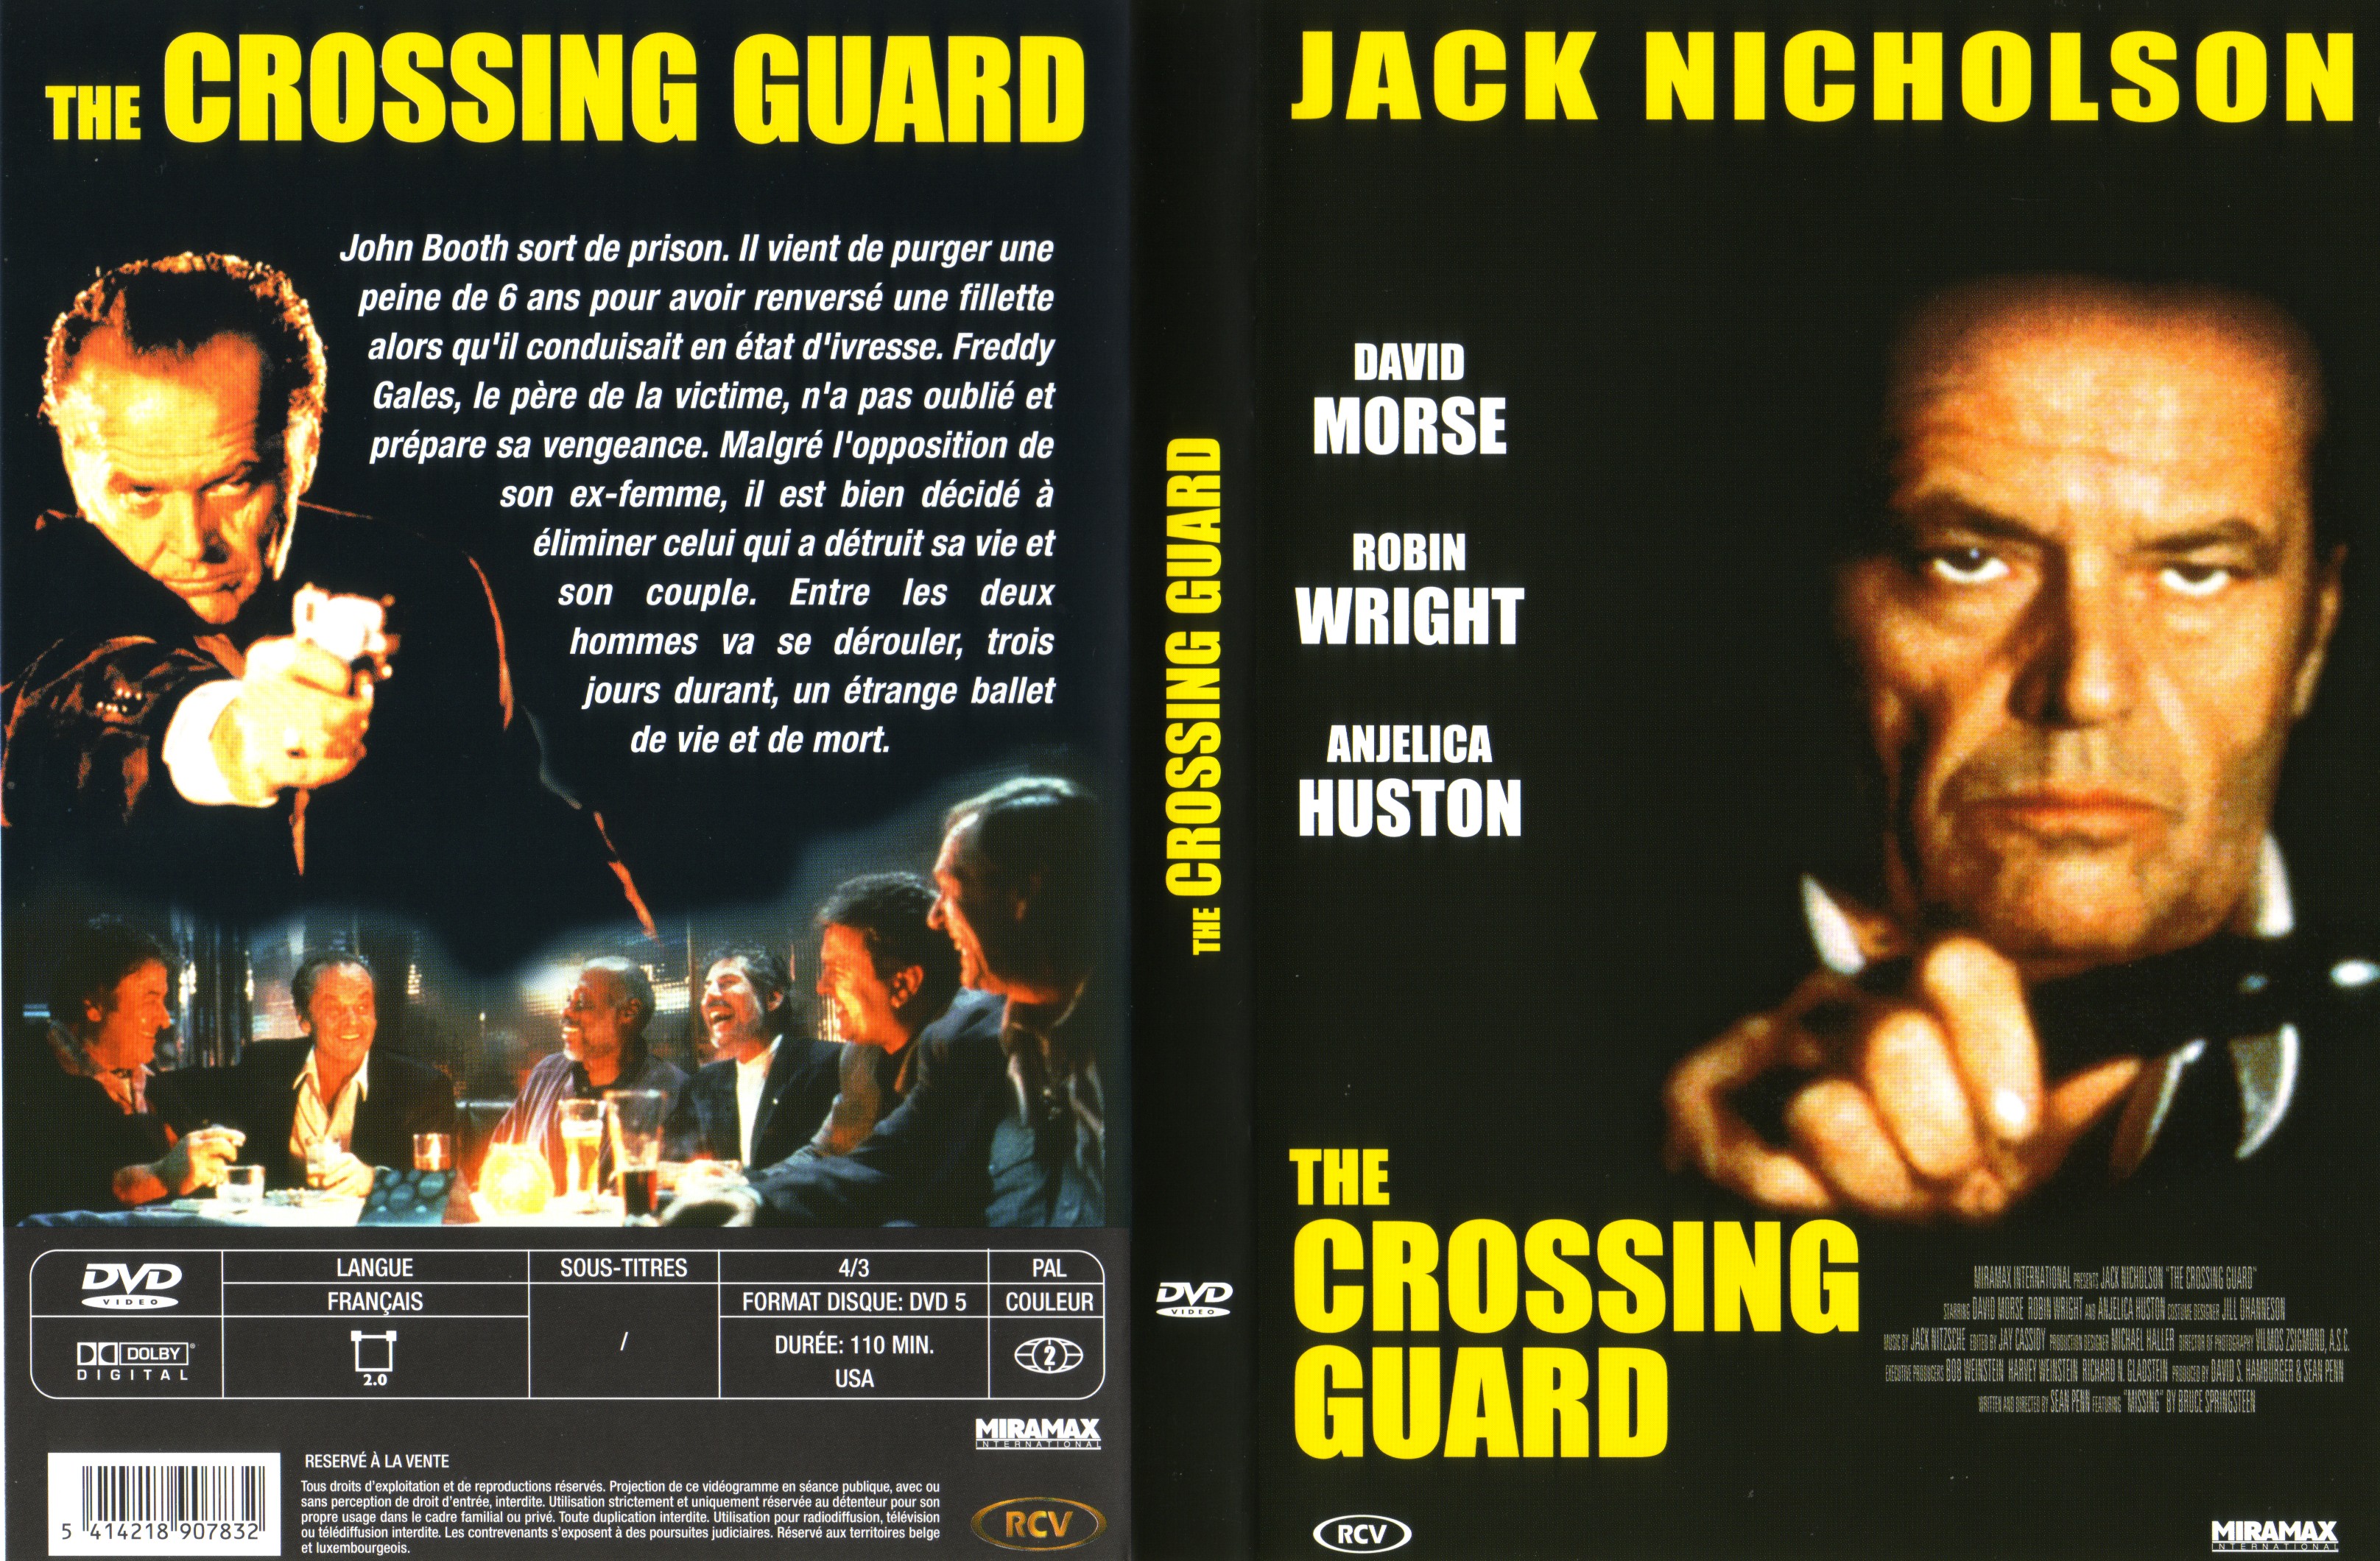 Jaquette DVD The crossing guard